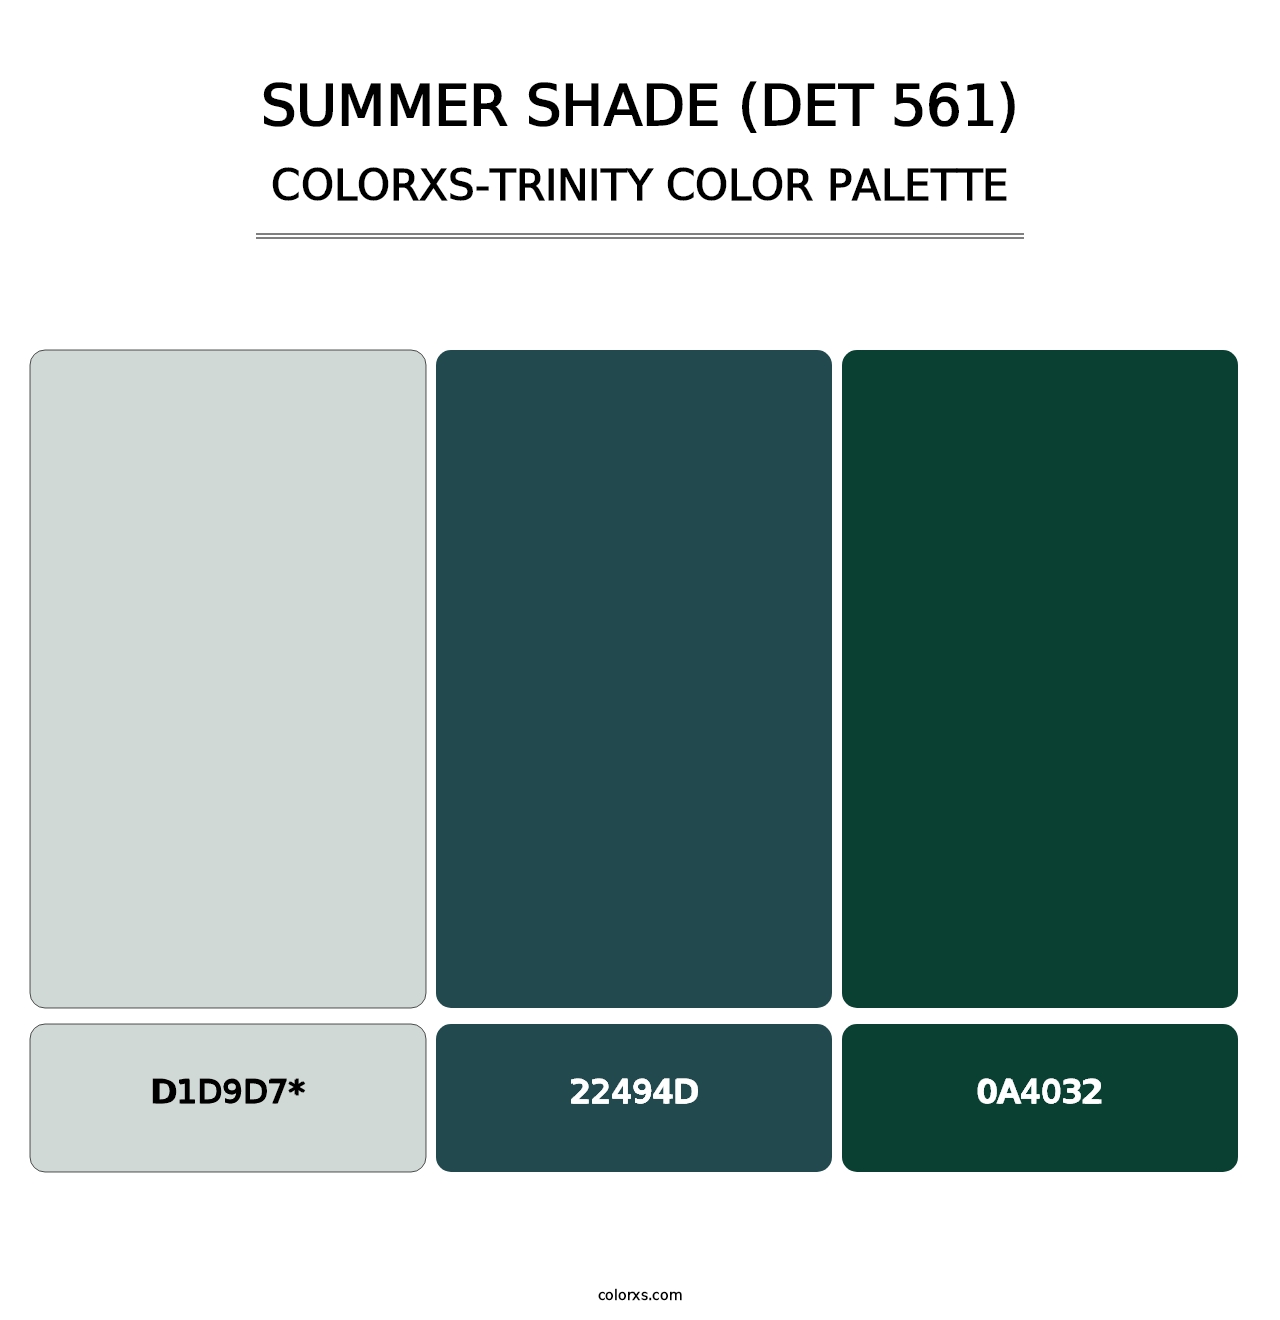 Summer Shade (DET 561) - Colorxs Trinity Palette